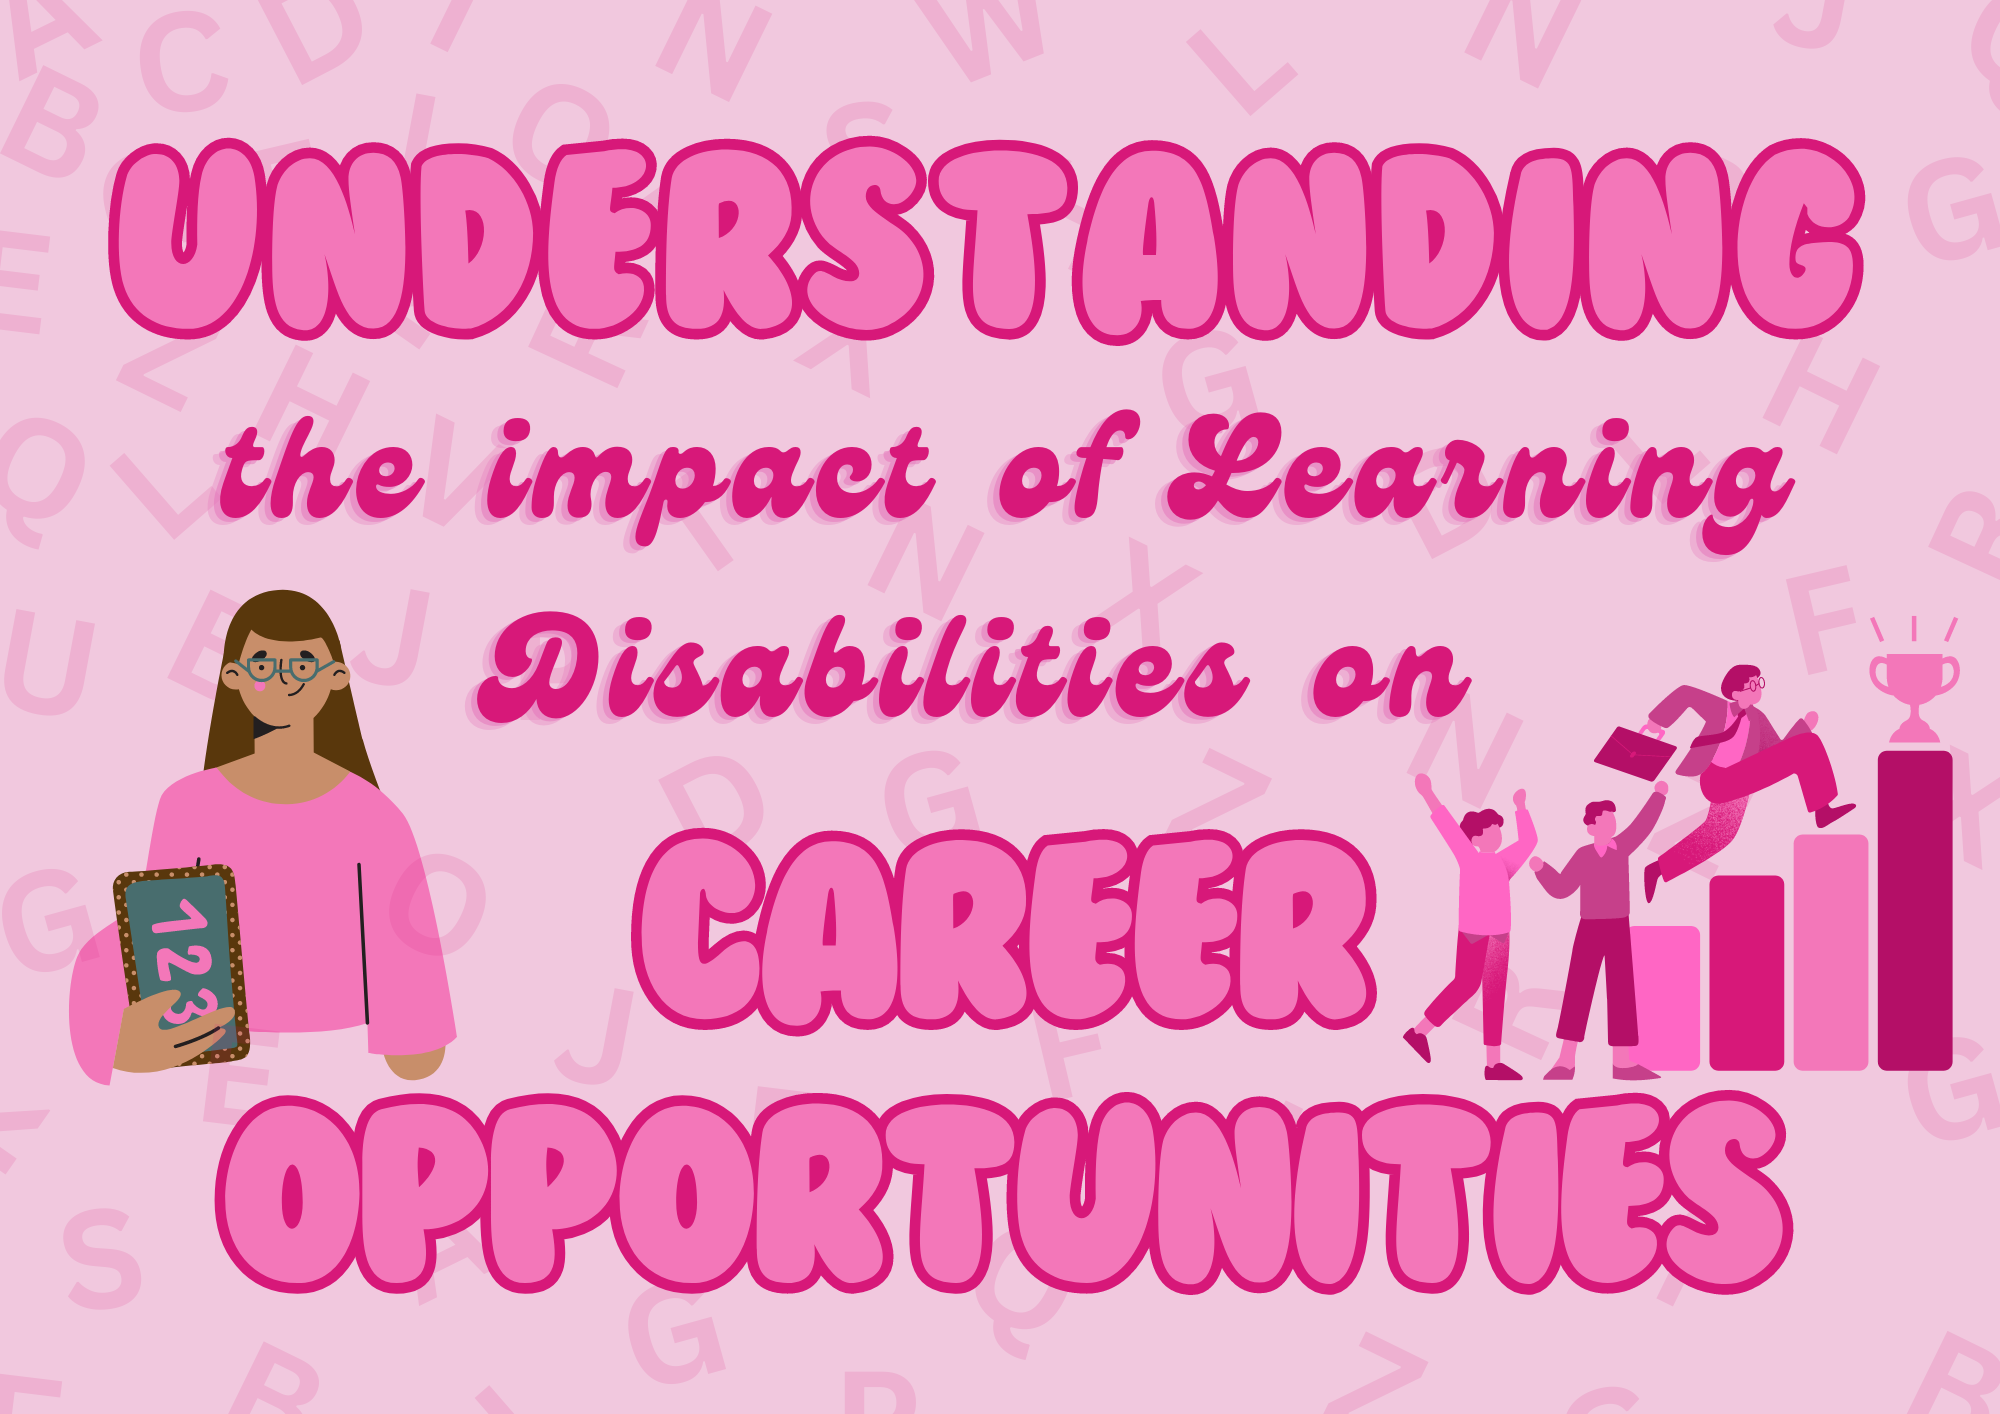 Understanding the impact of learning disabilities on career opportunities